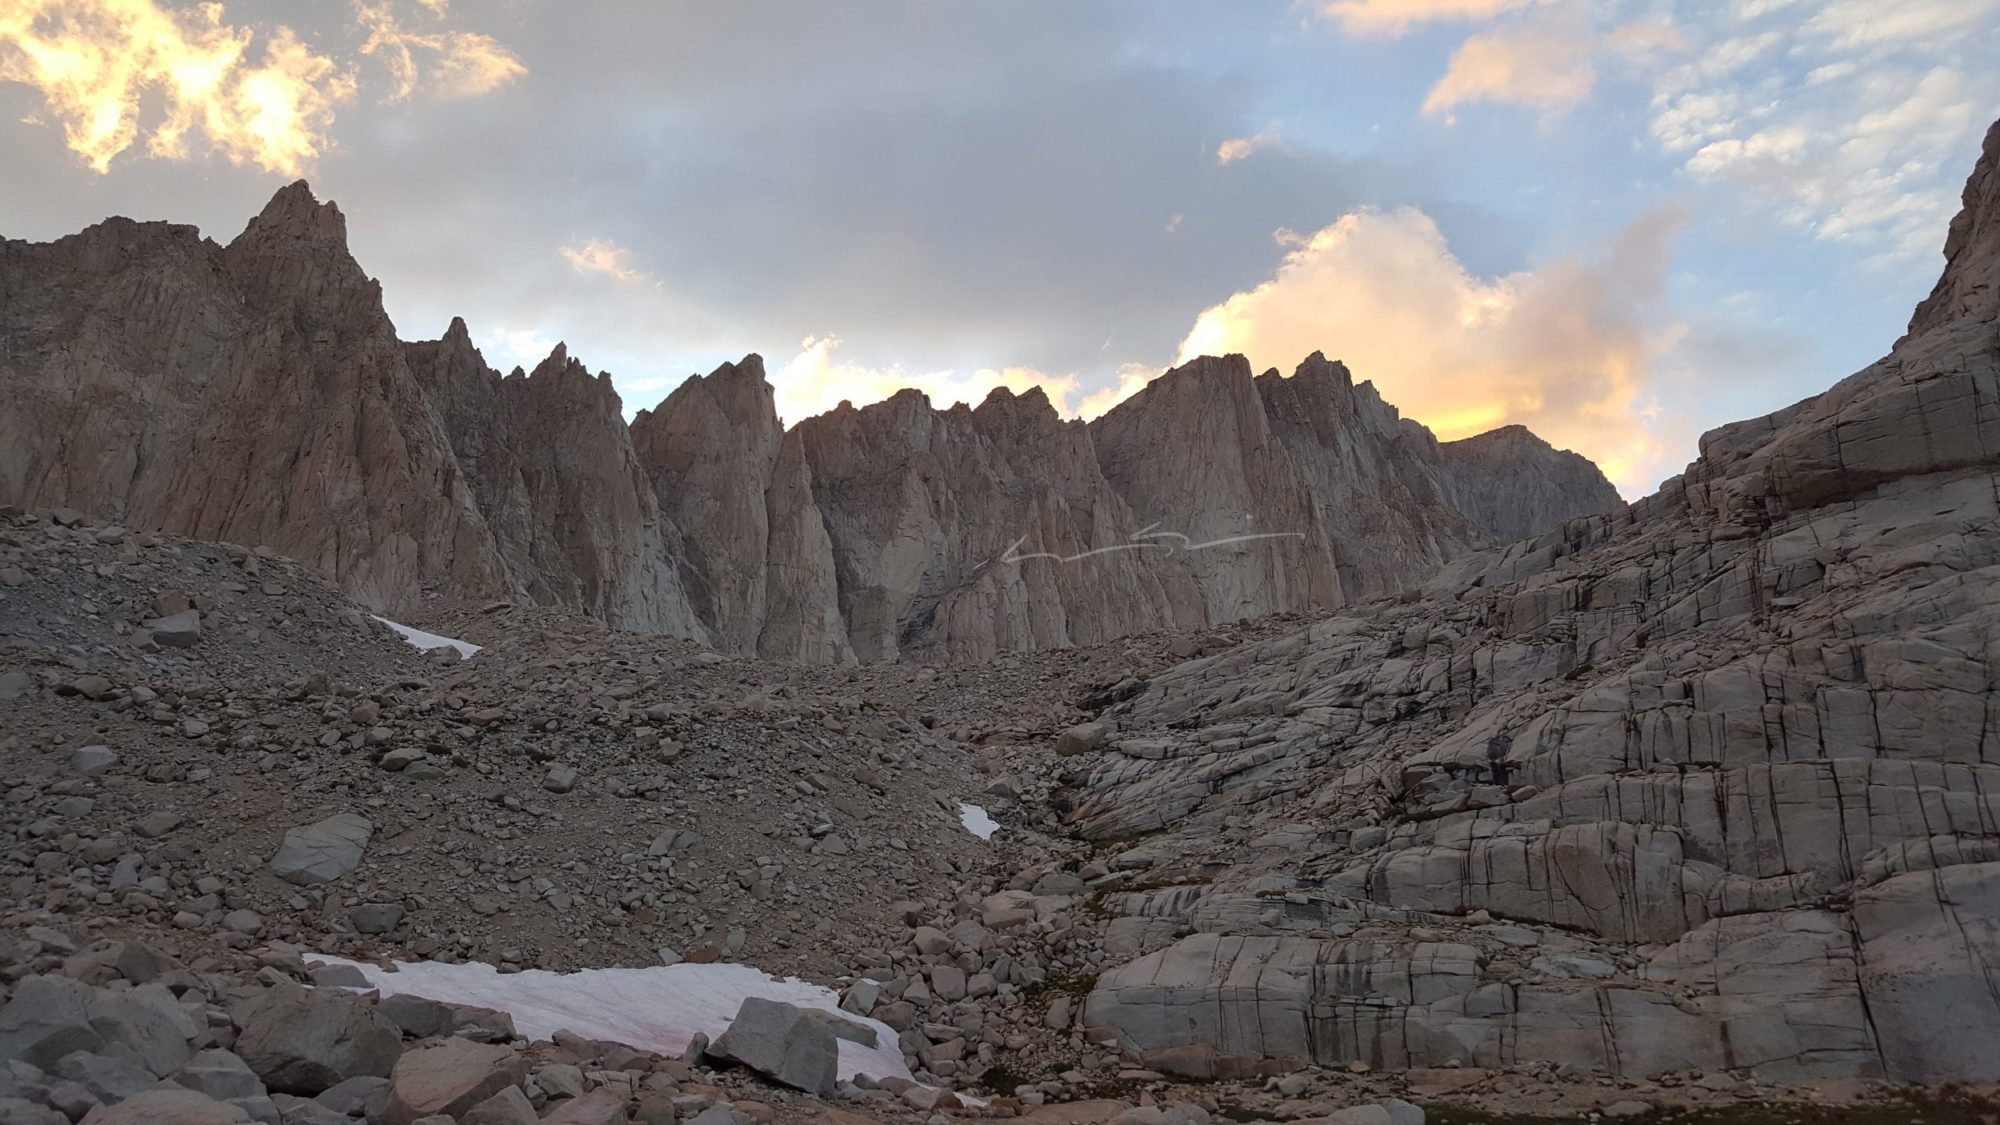 mount whitney and its sub peaks at sunset